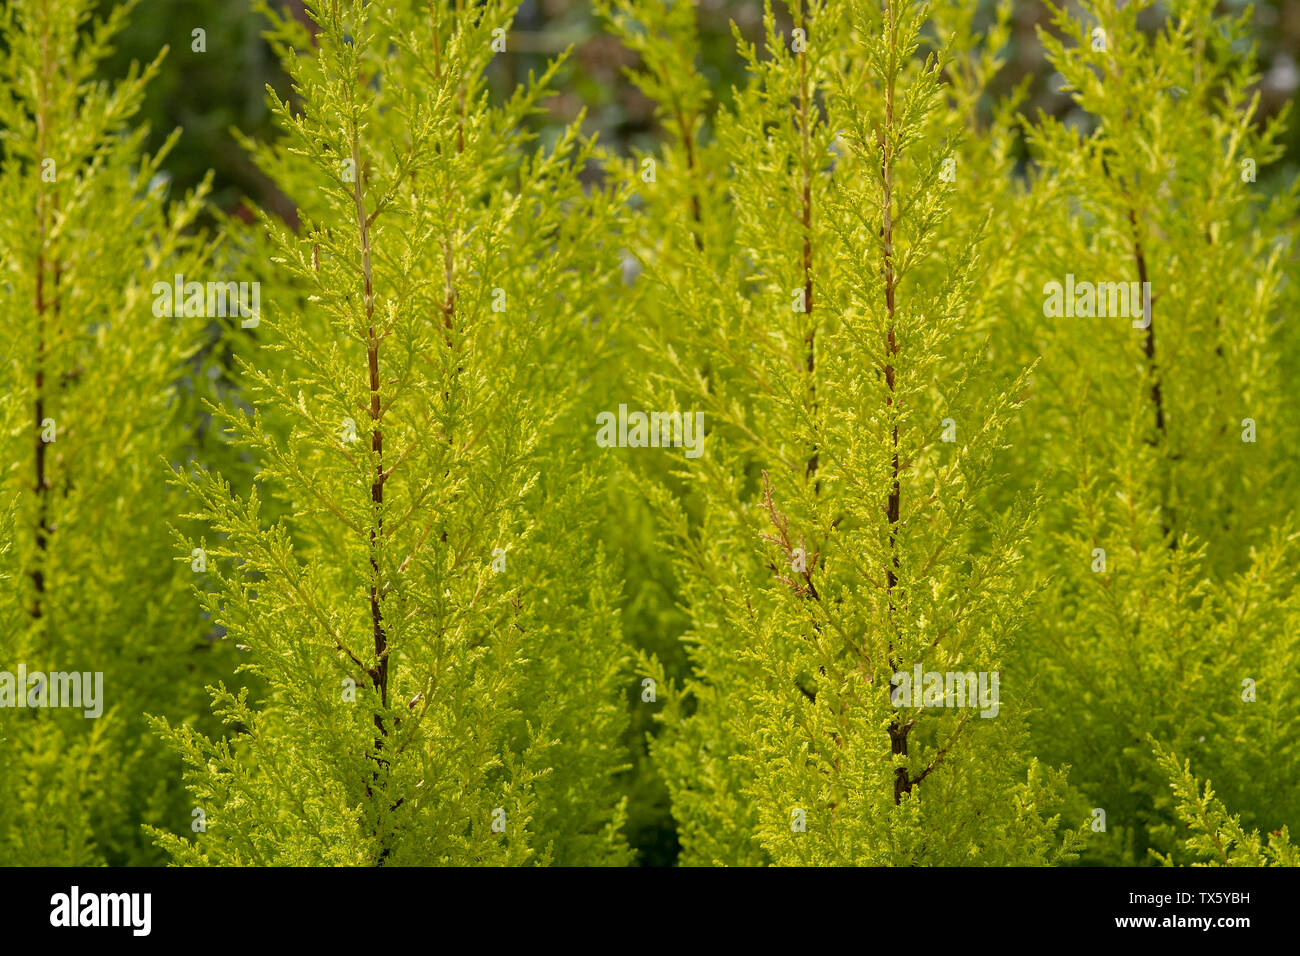 Conifer citrus cypress plant in pots spring green colour Stock Photo